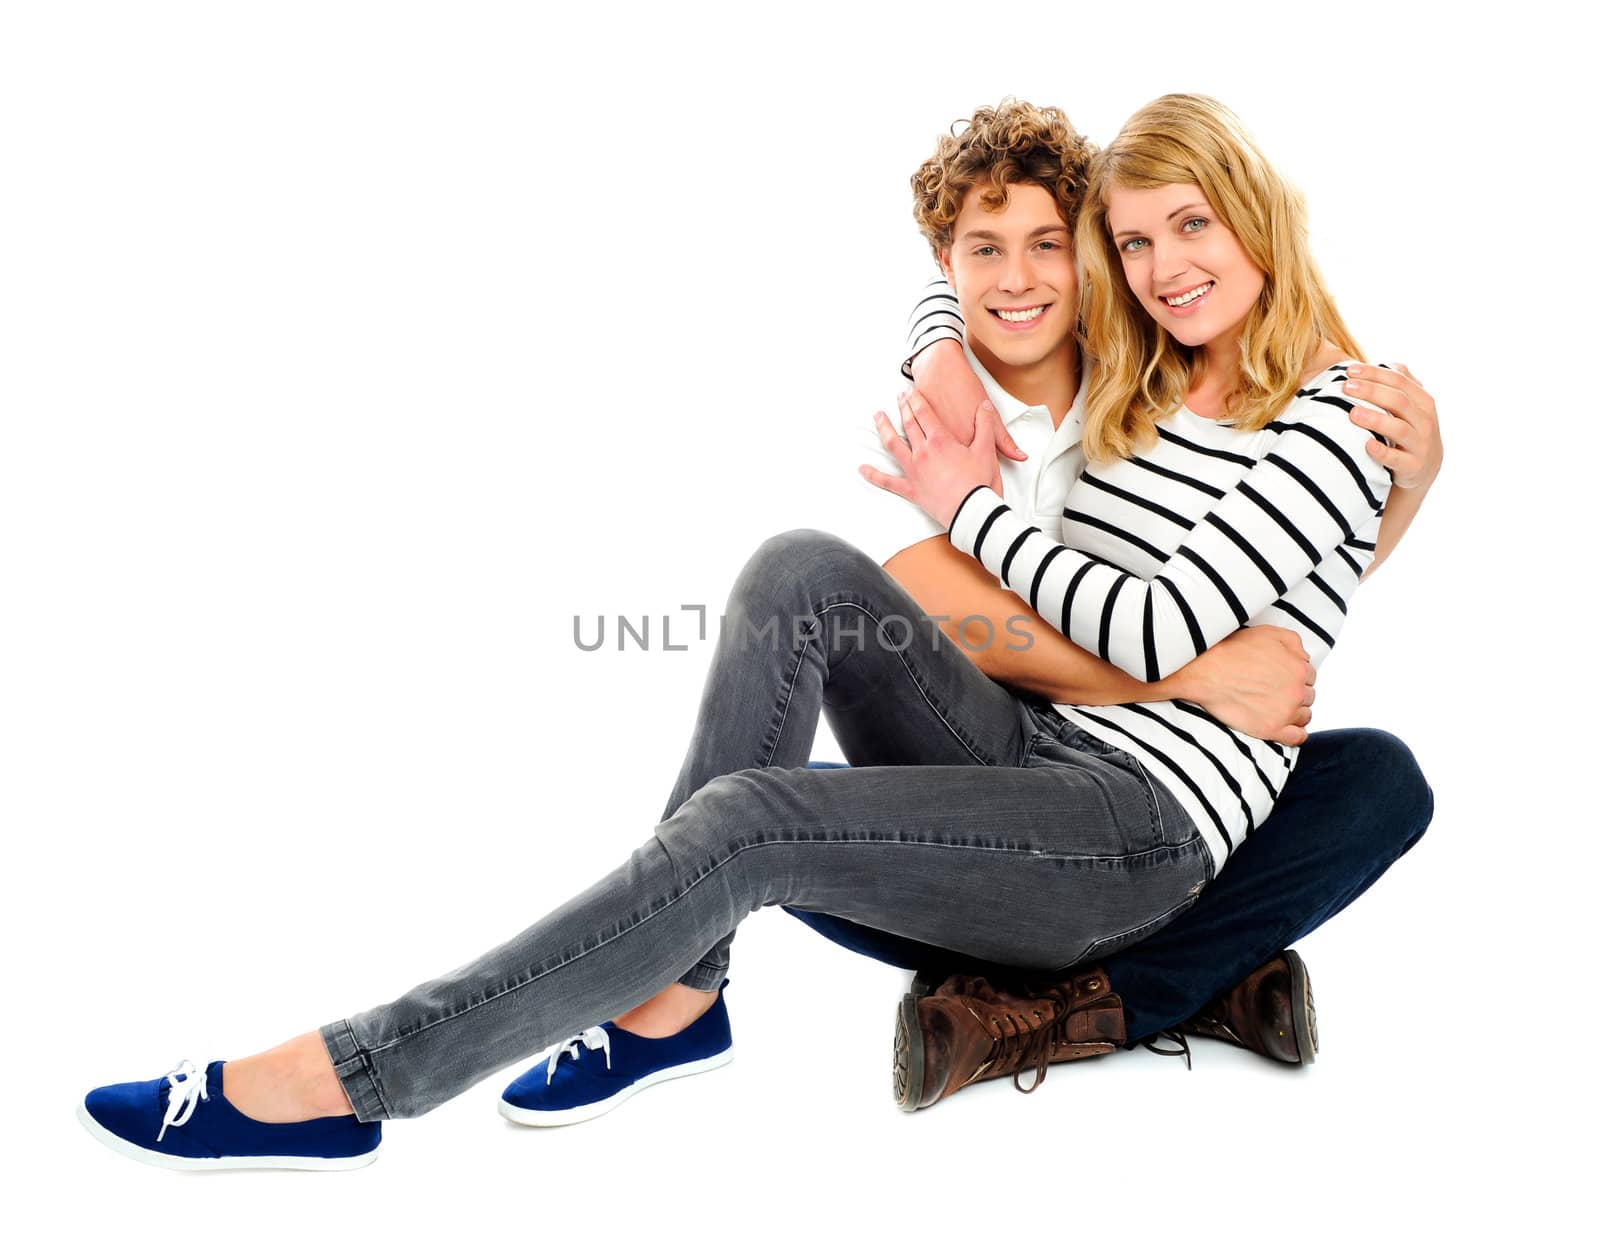 Girlfriend sitting on her partners lap against a white background. Couple embracing